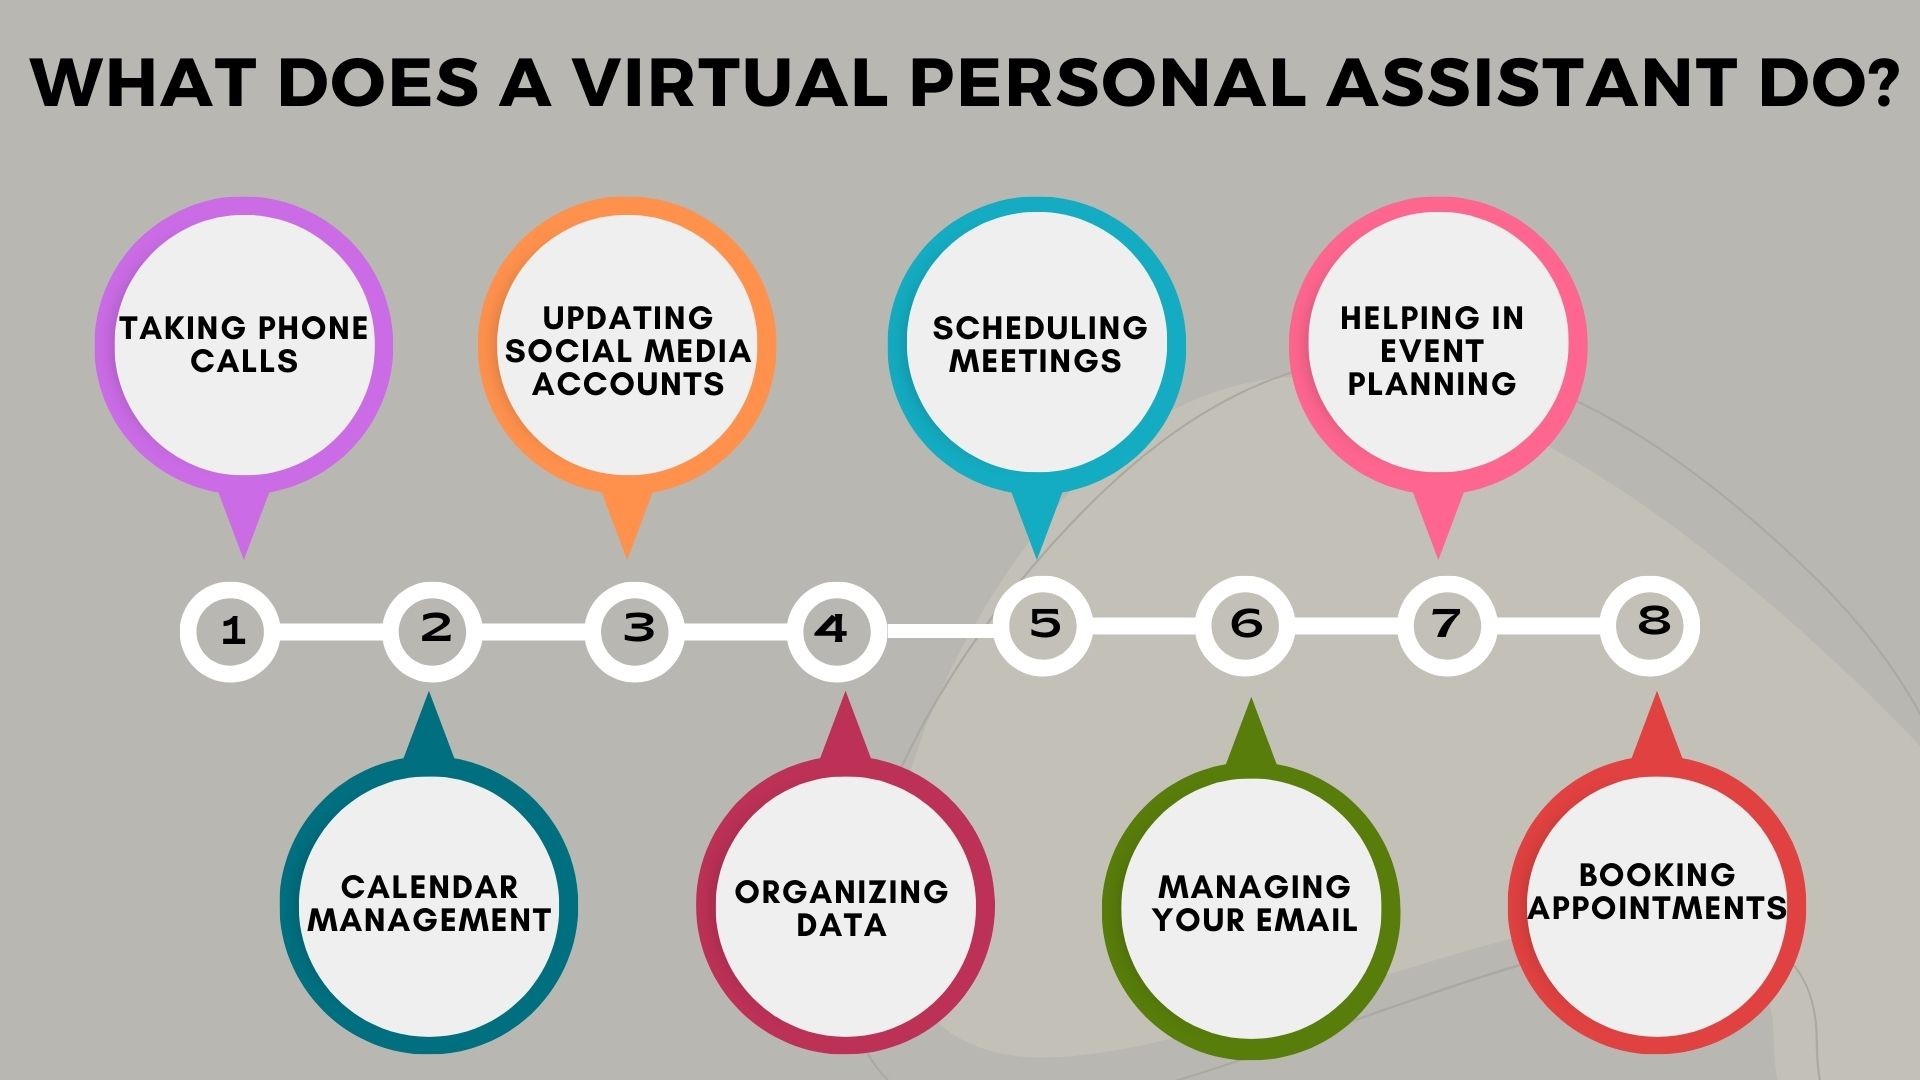 What Does a Virtual Personal Assistant Do